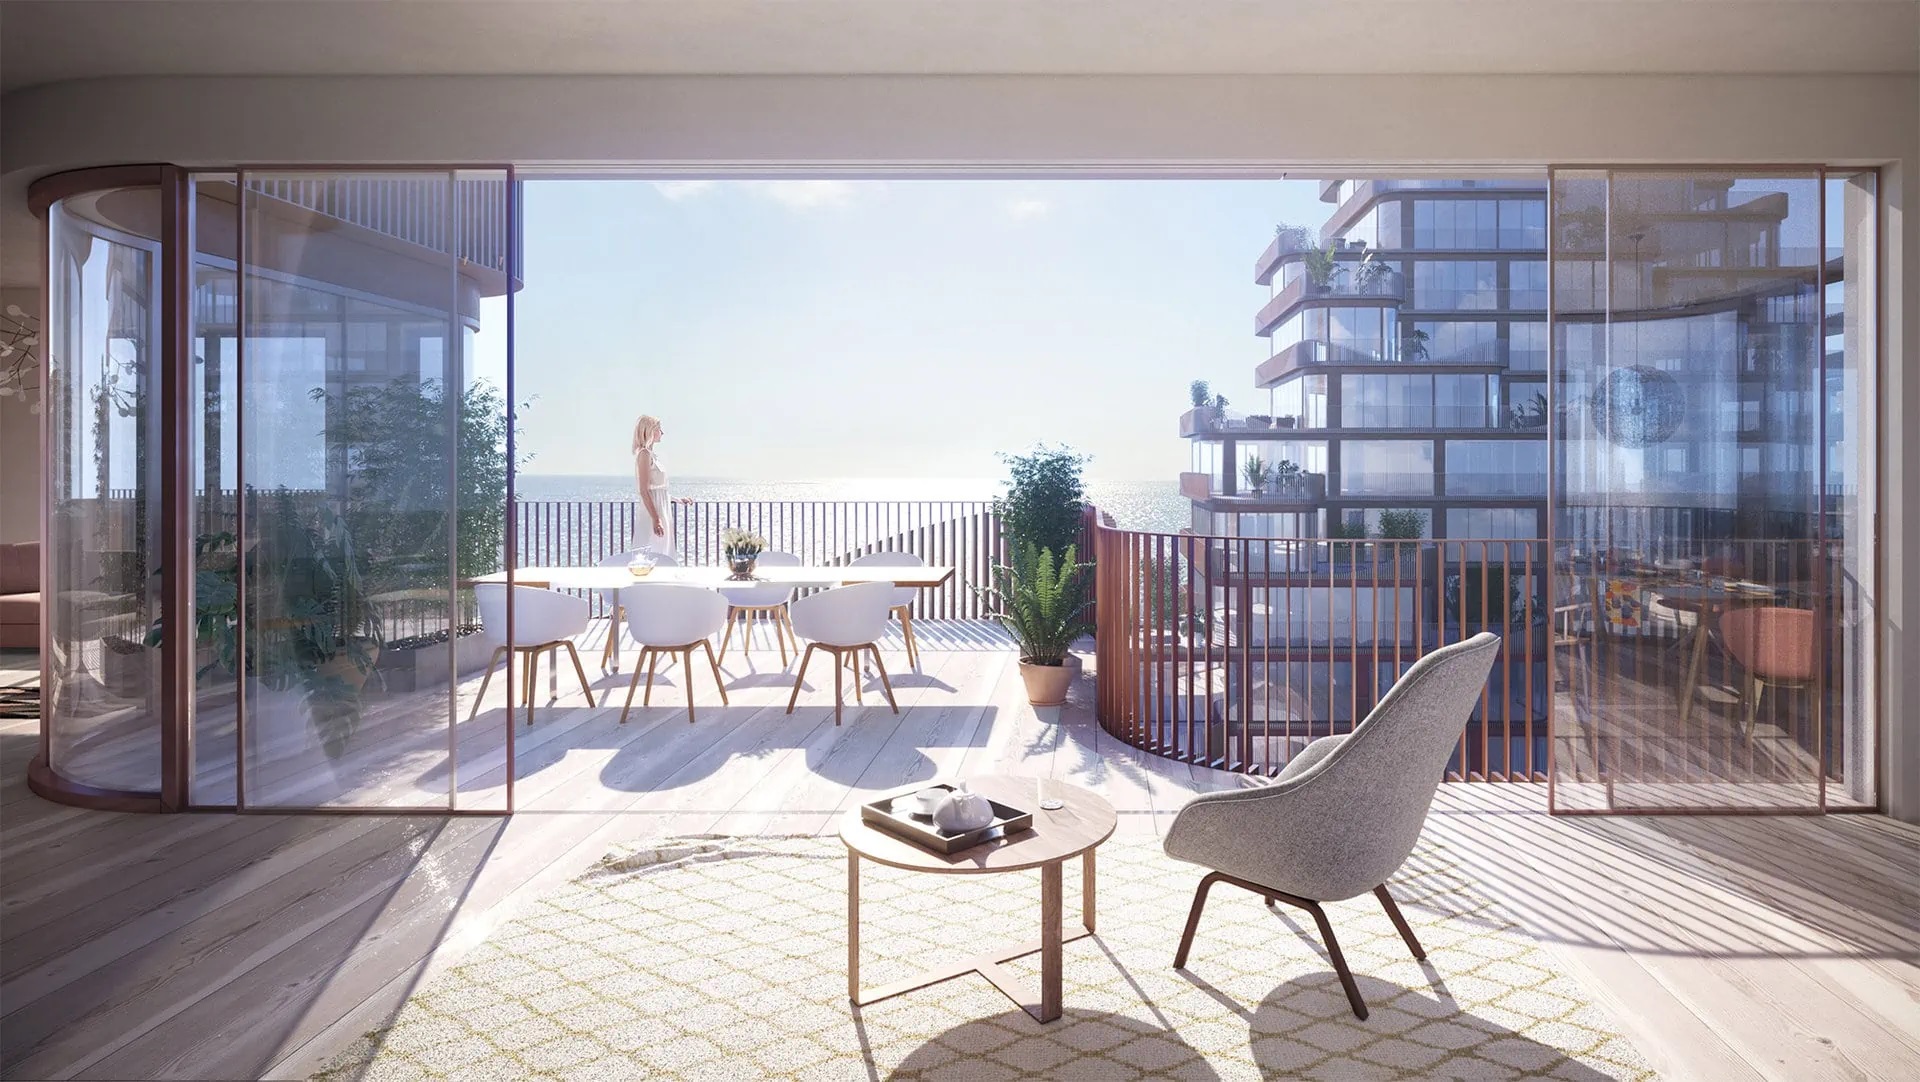 Aqualuna at Bayside Toronto is a new beacon of luxury waterfront living